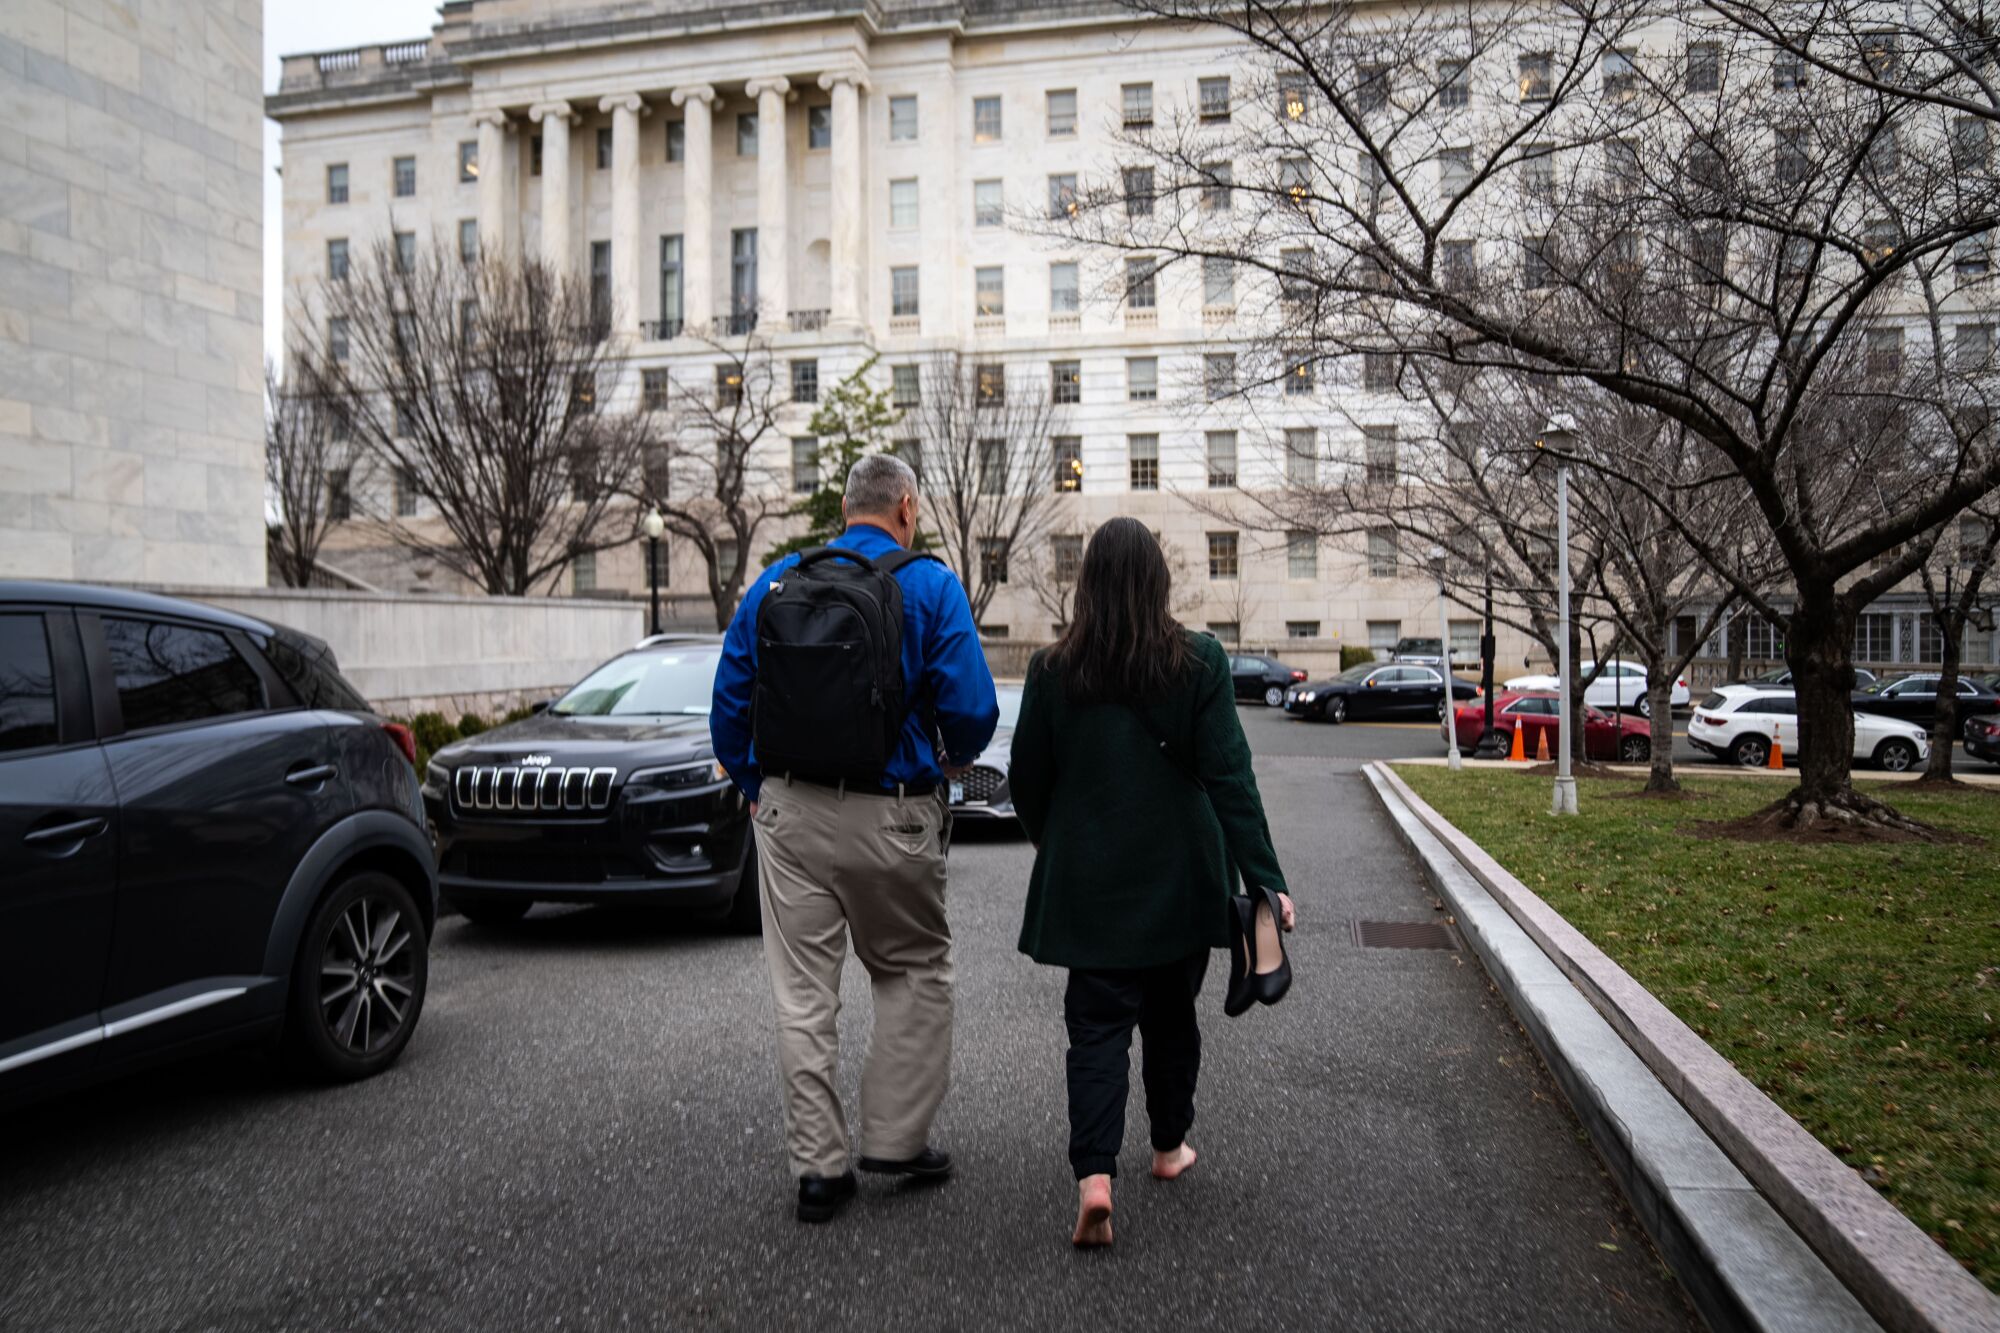 A man and woman walk past parked cars toward an office building.